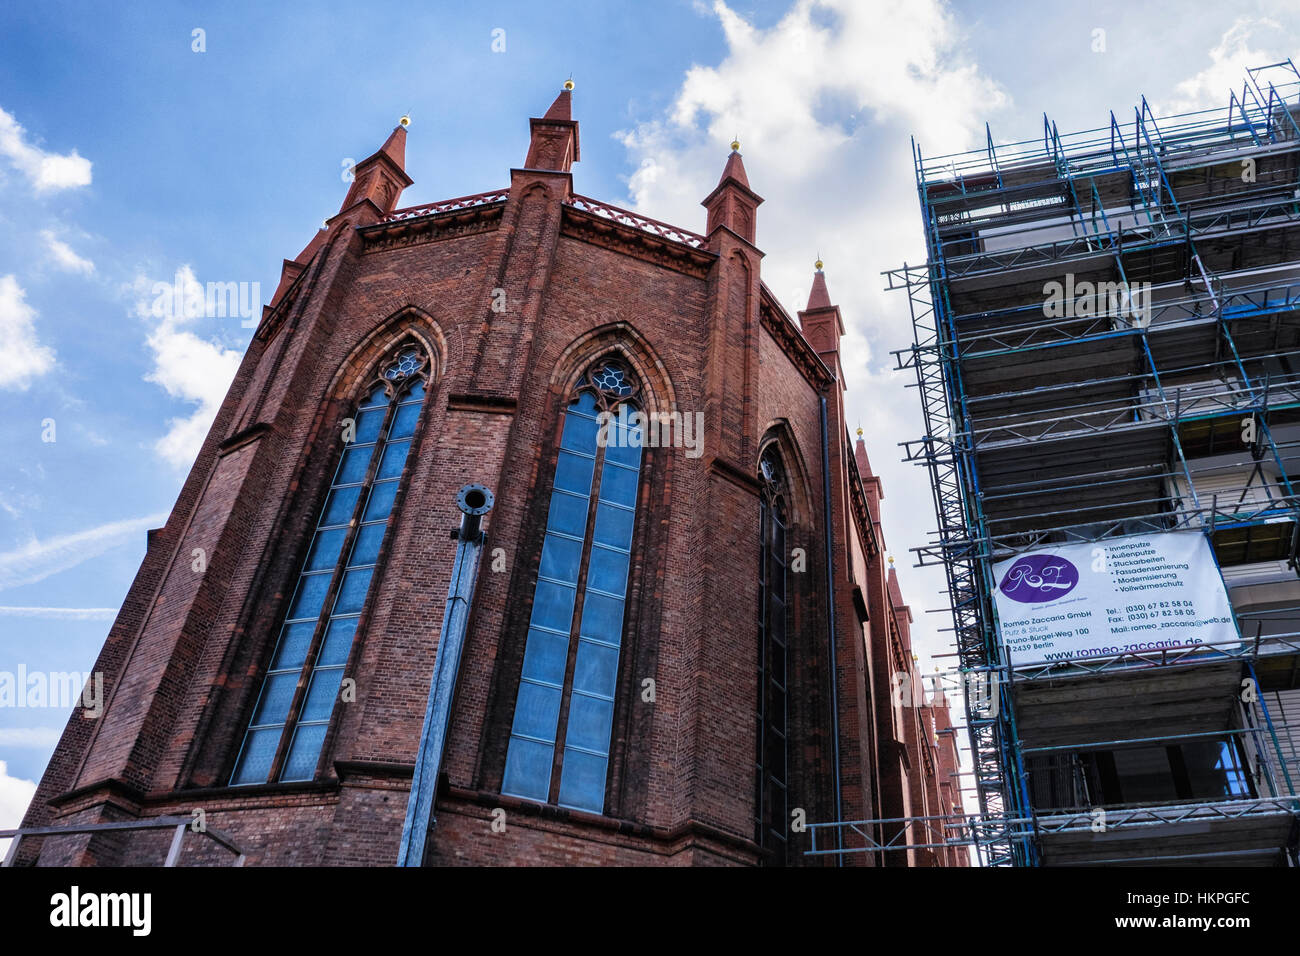 Berlin, Mitte. The beautiful Neo-gothic Friedrichswerder Church is closed as result of new building works around it. Poor city planning. Stock Photo